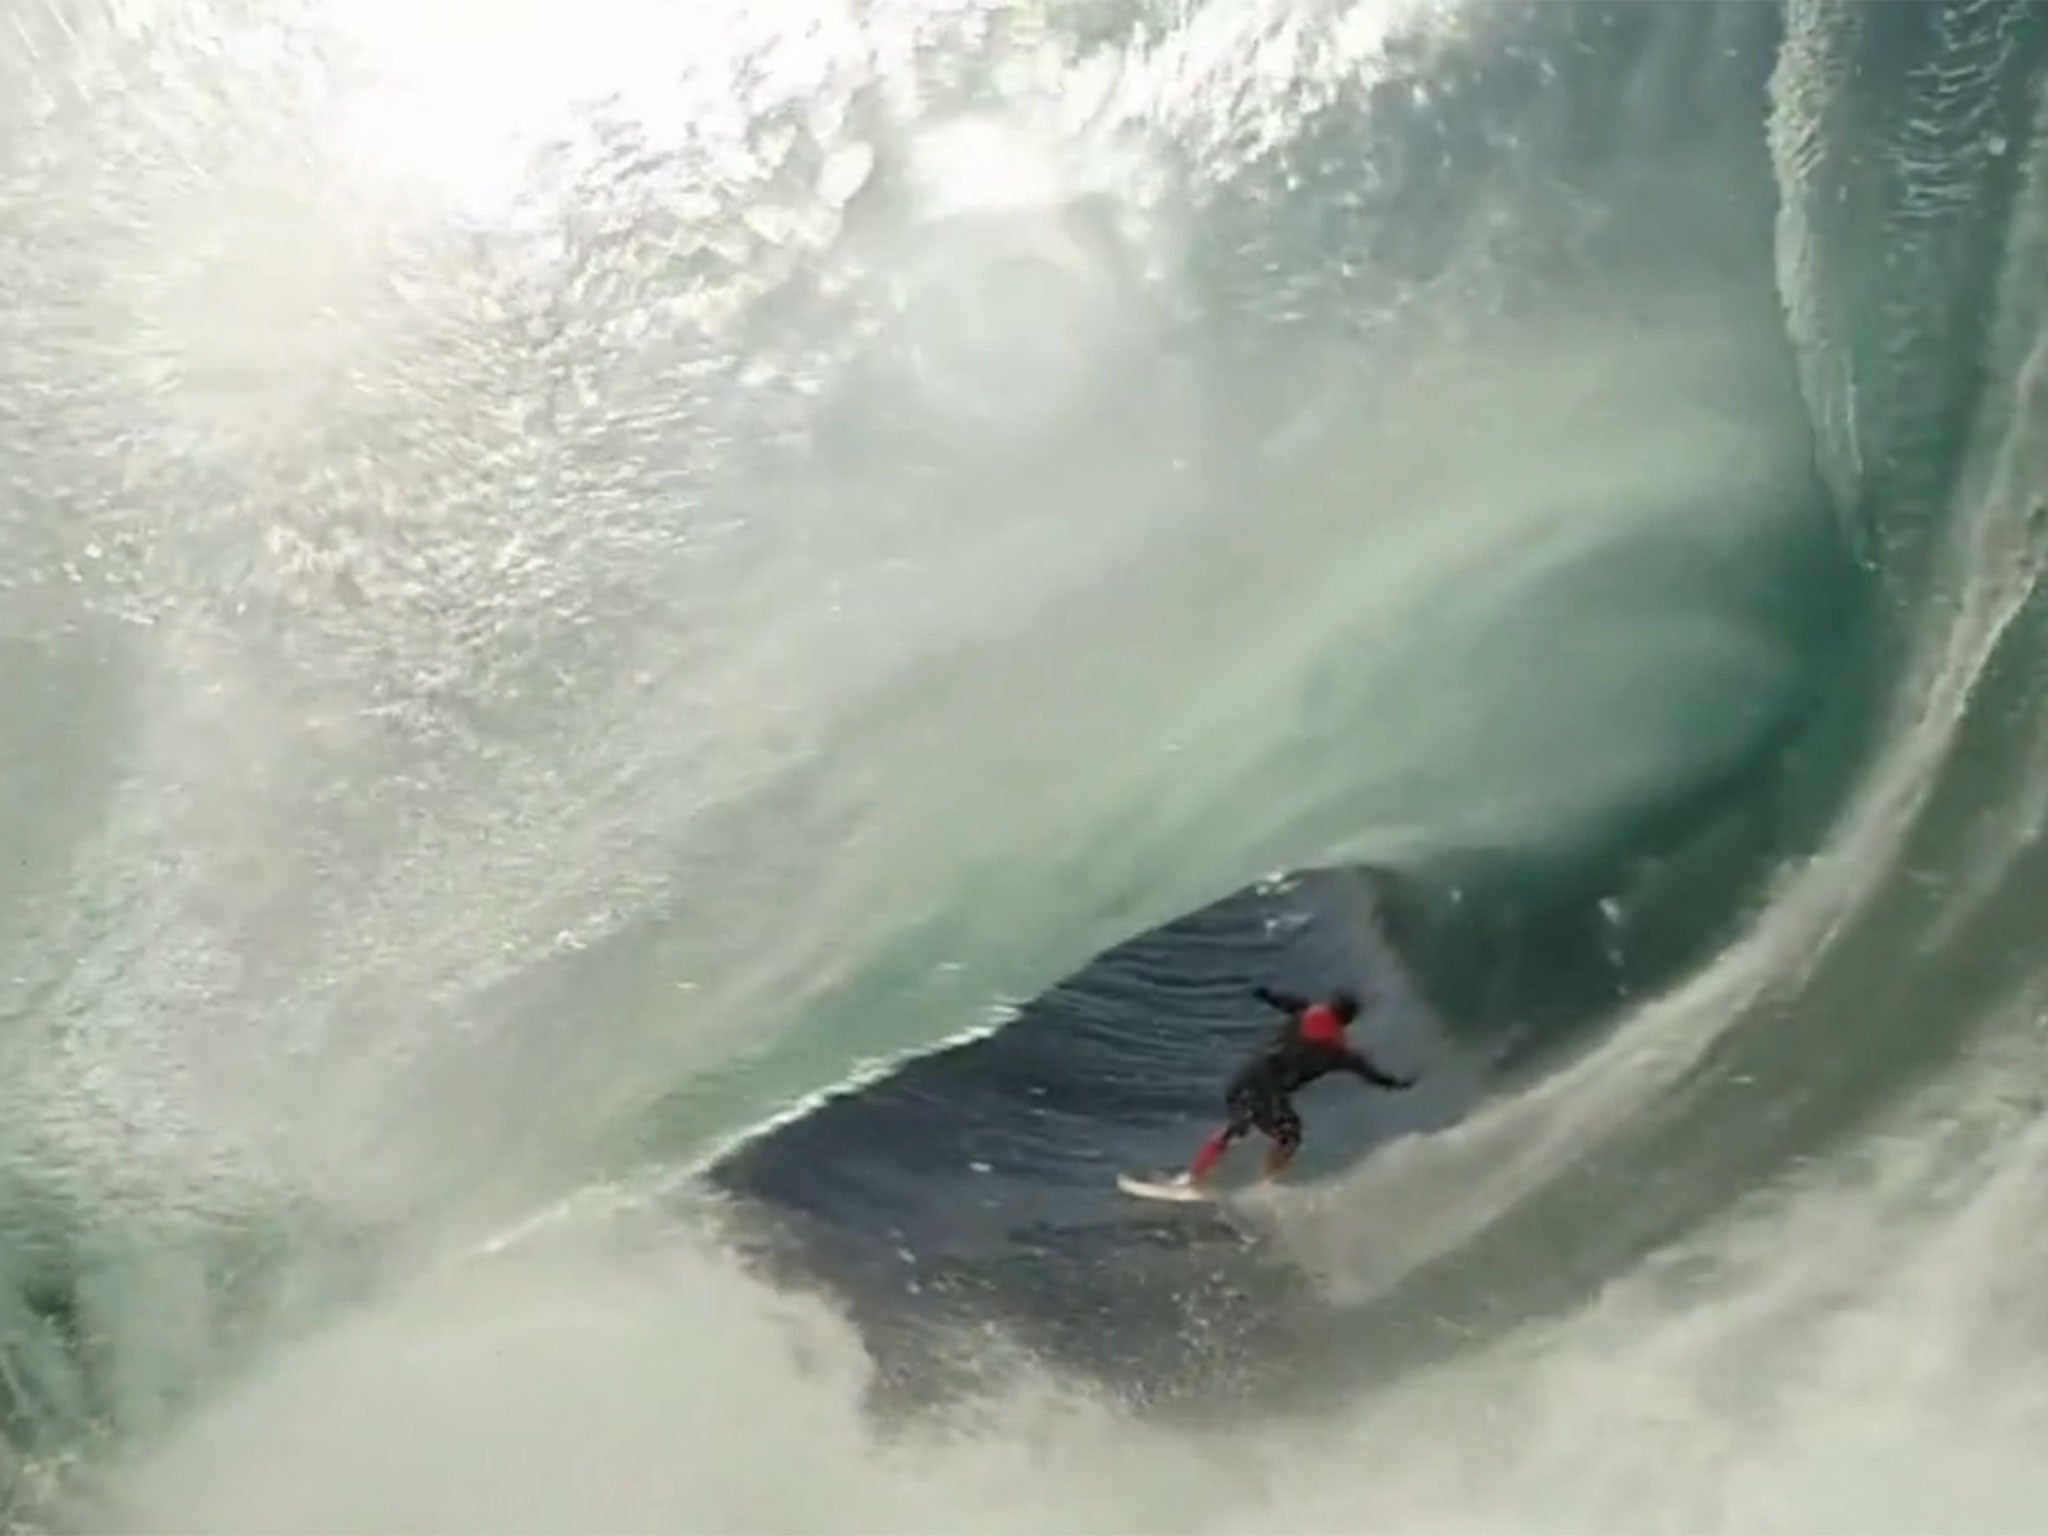 Amazing video captures moment surfer rides a wave in Australia